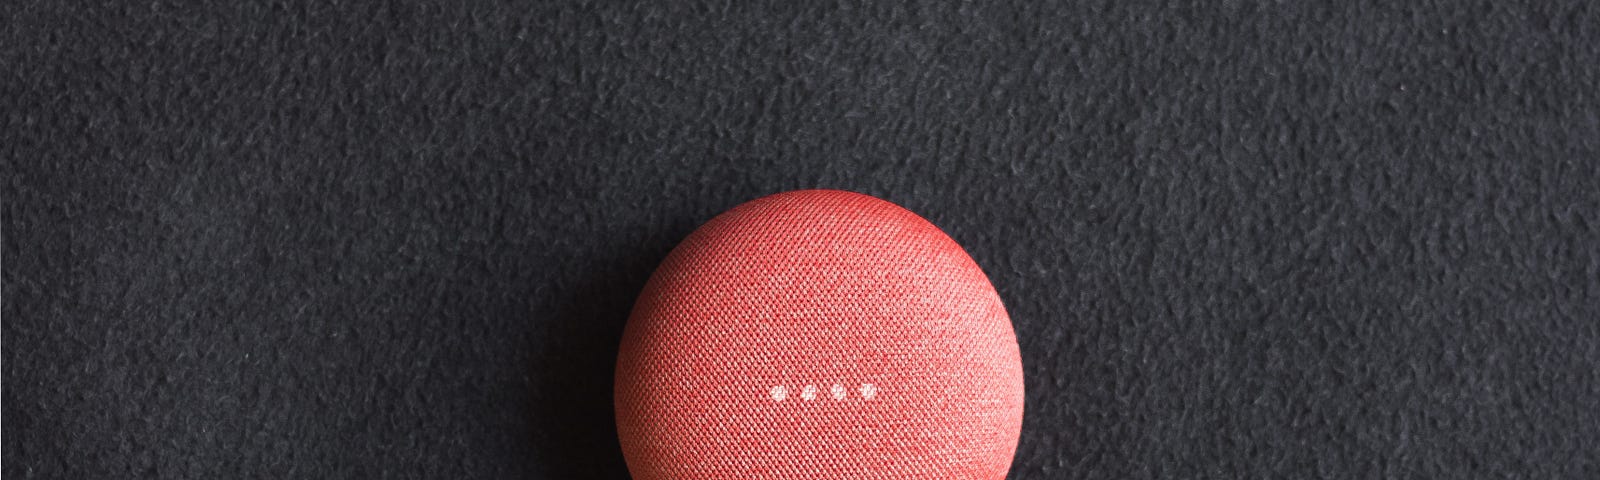 Google Nest Mini — A smart speaker from Google which can be controlled by voice